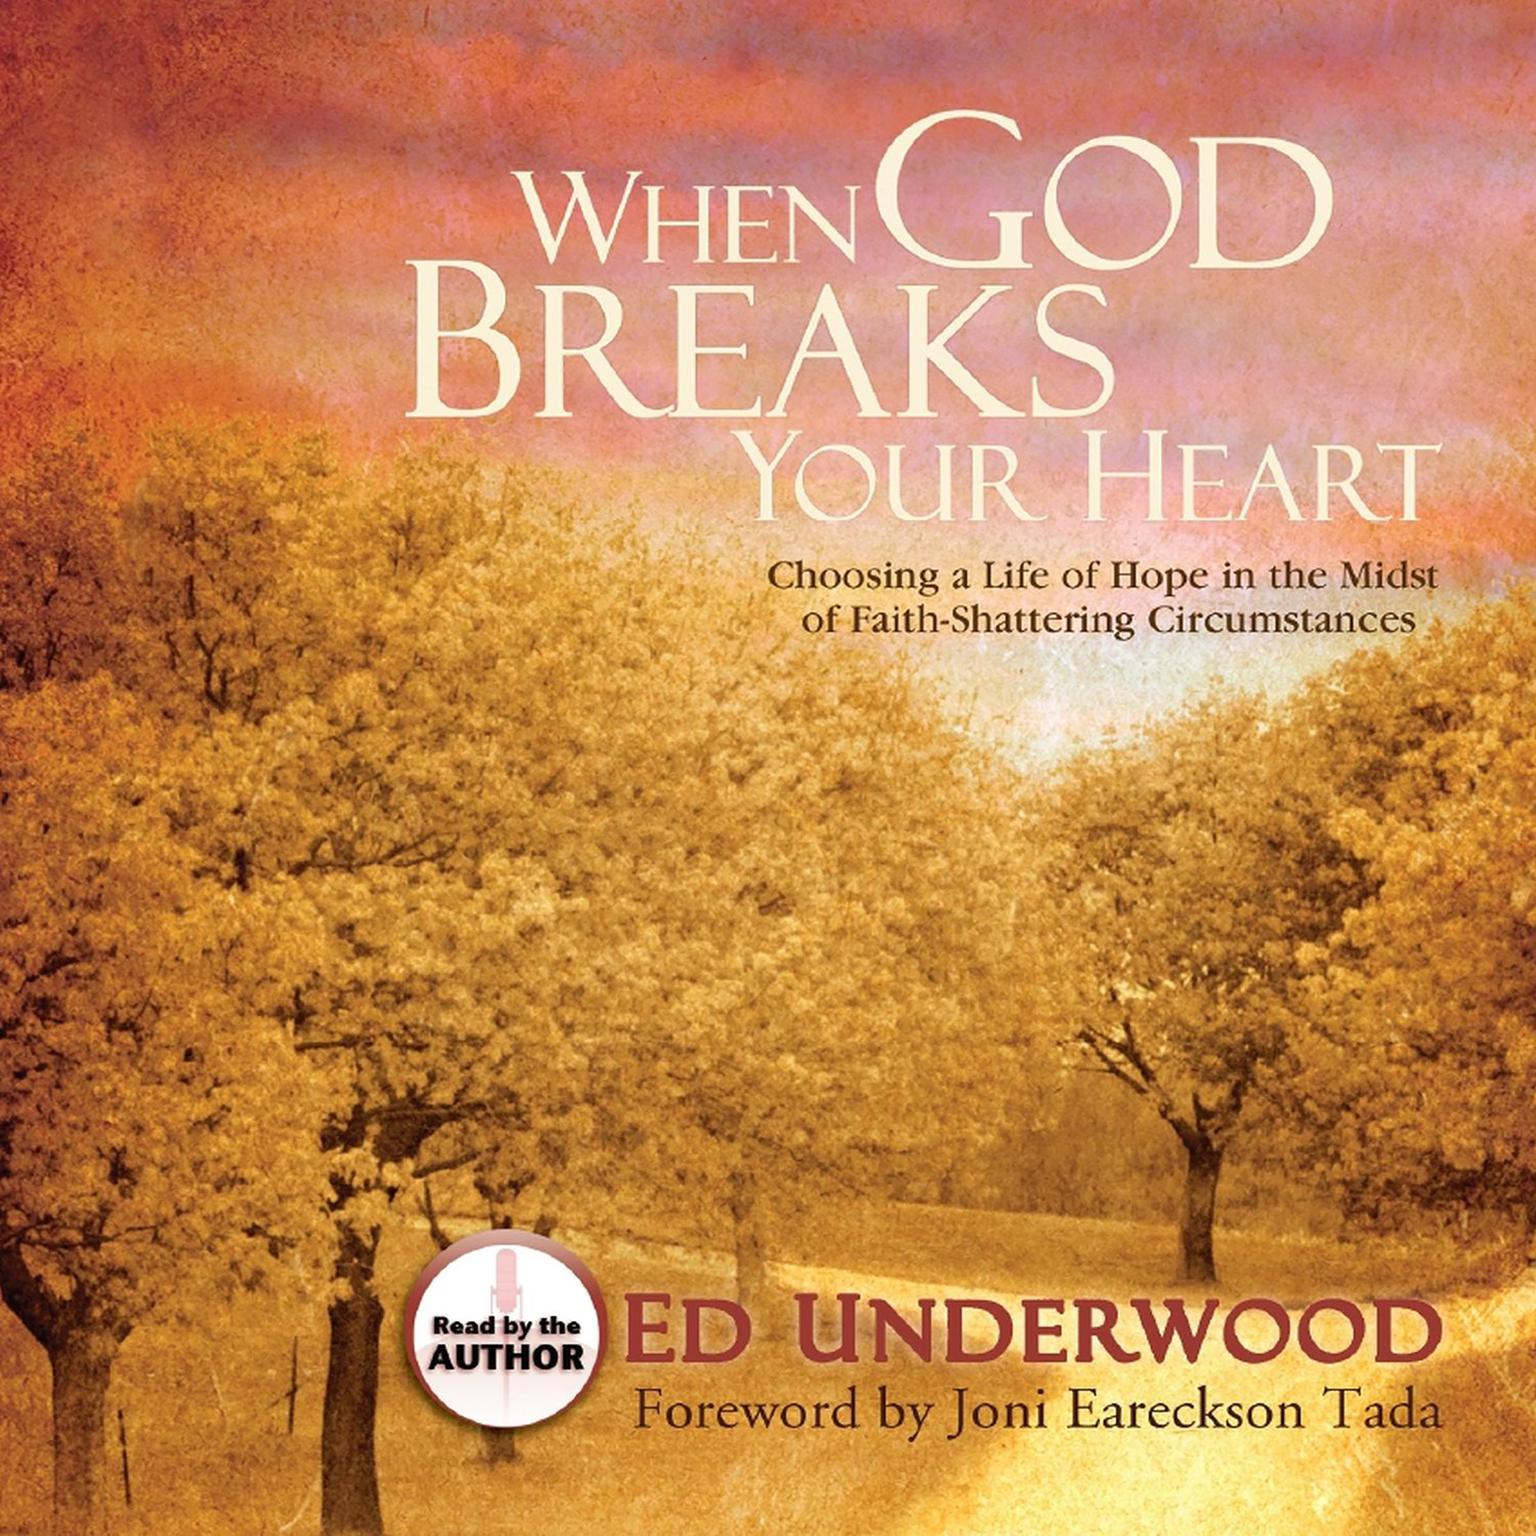 When God Breaks Your Heart: Choosing Hope in the Midst of Faith-Shattering Circumstances Audiobook, by Ed Underwood